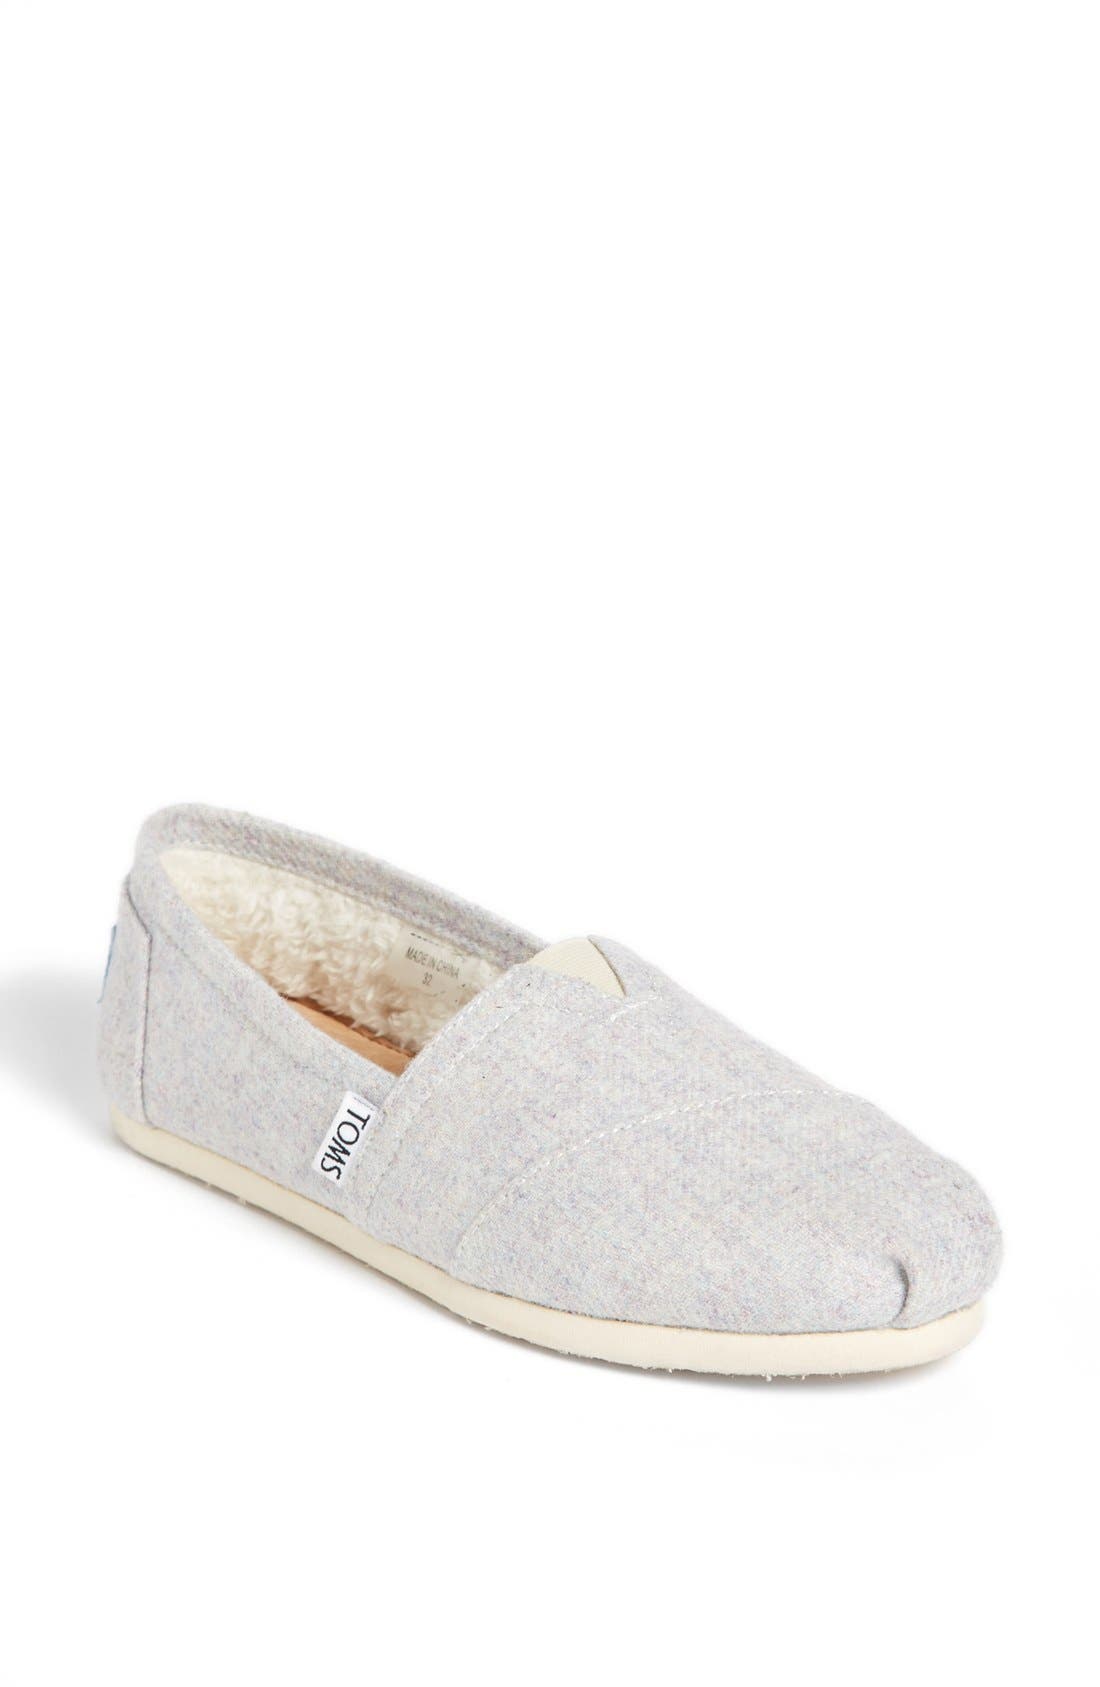 toms lined shoes